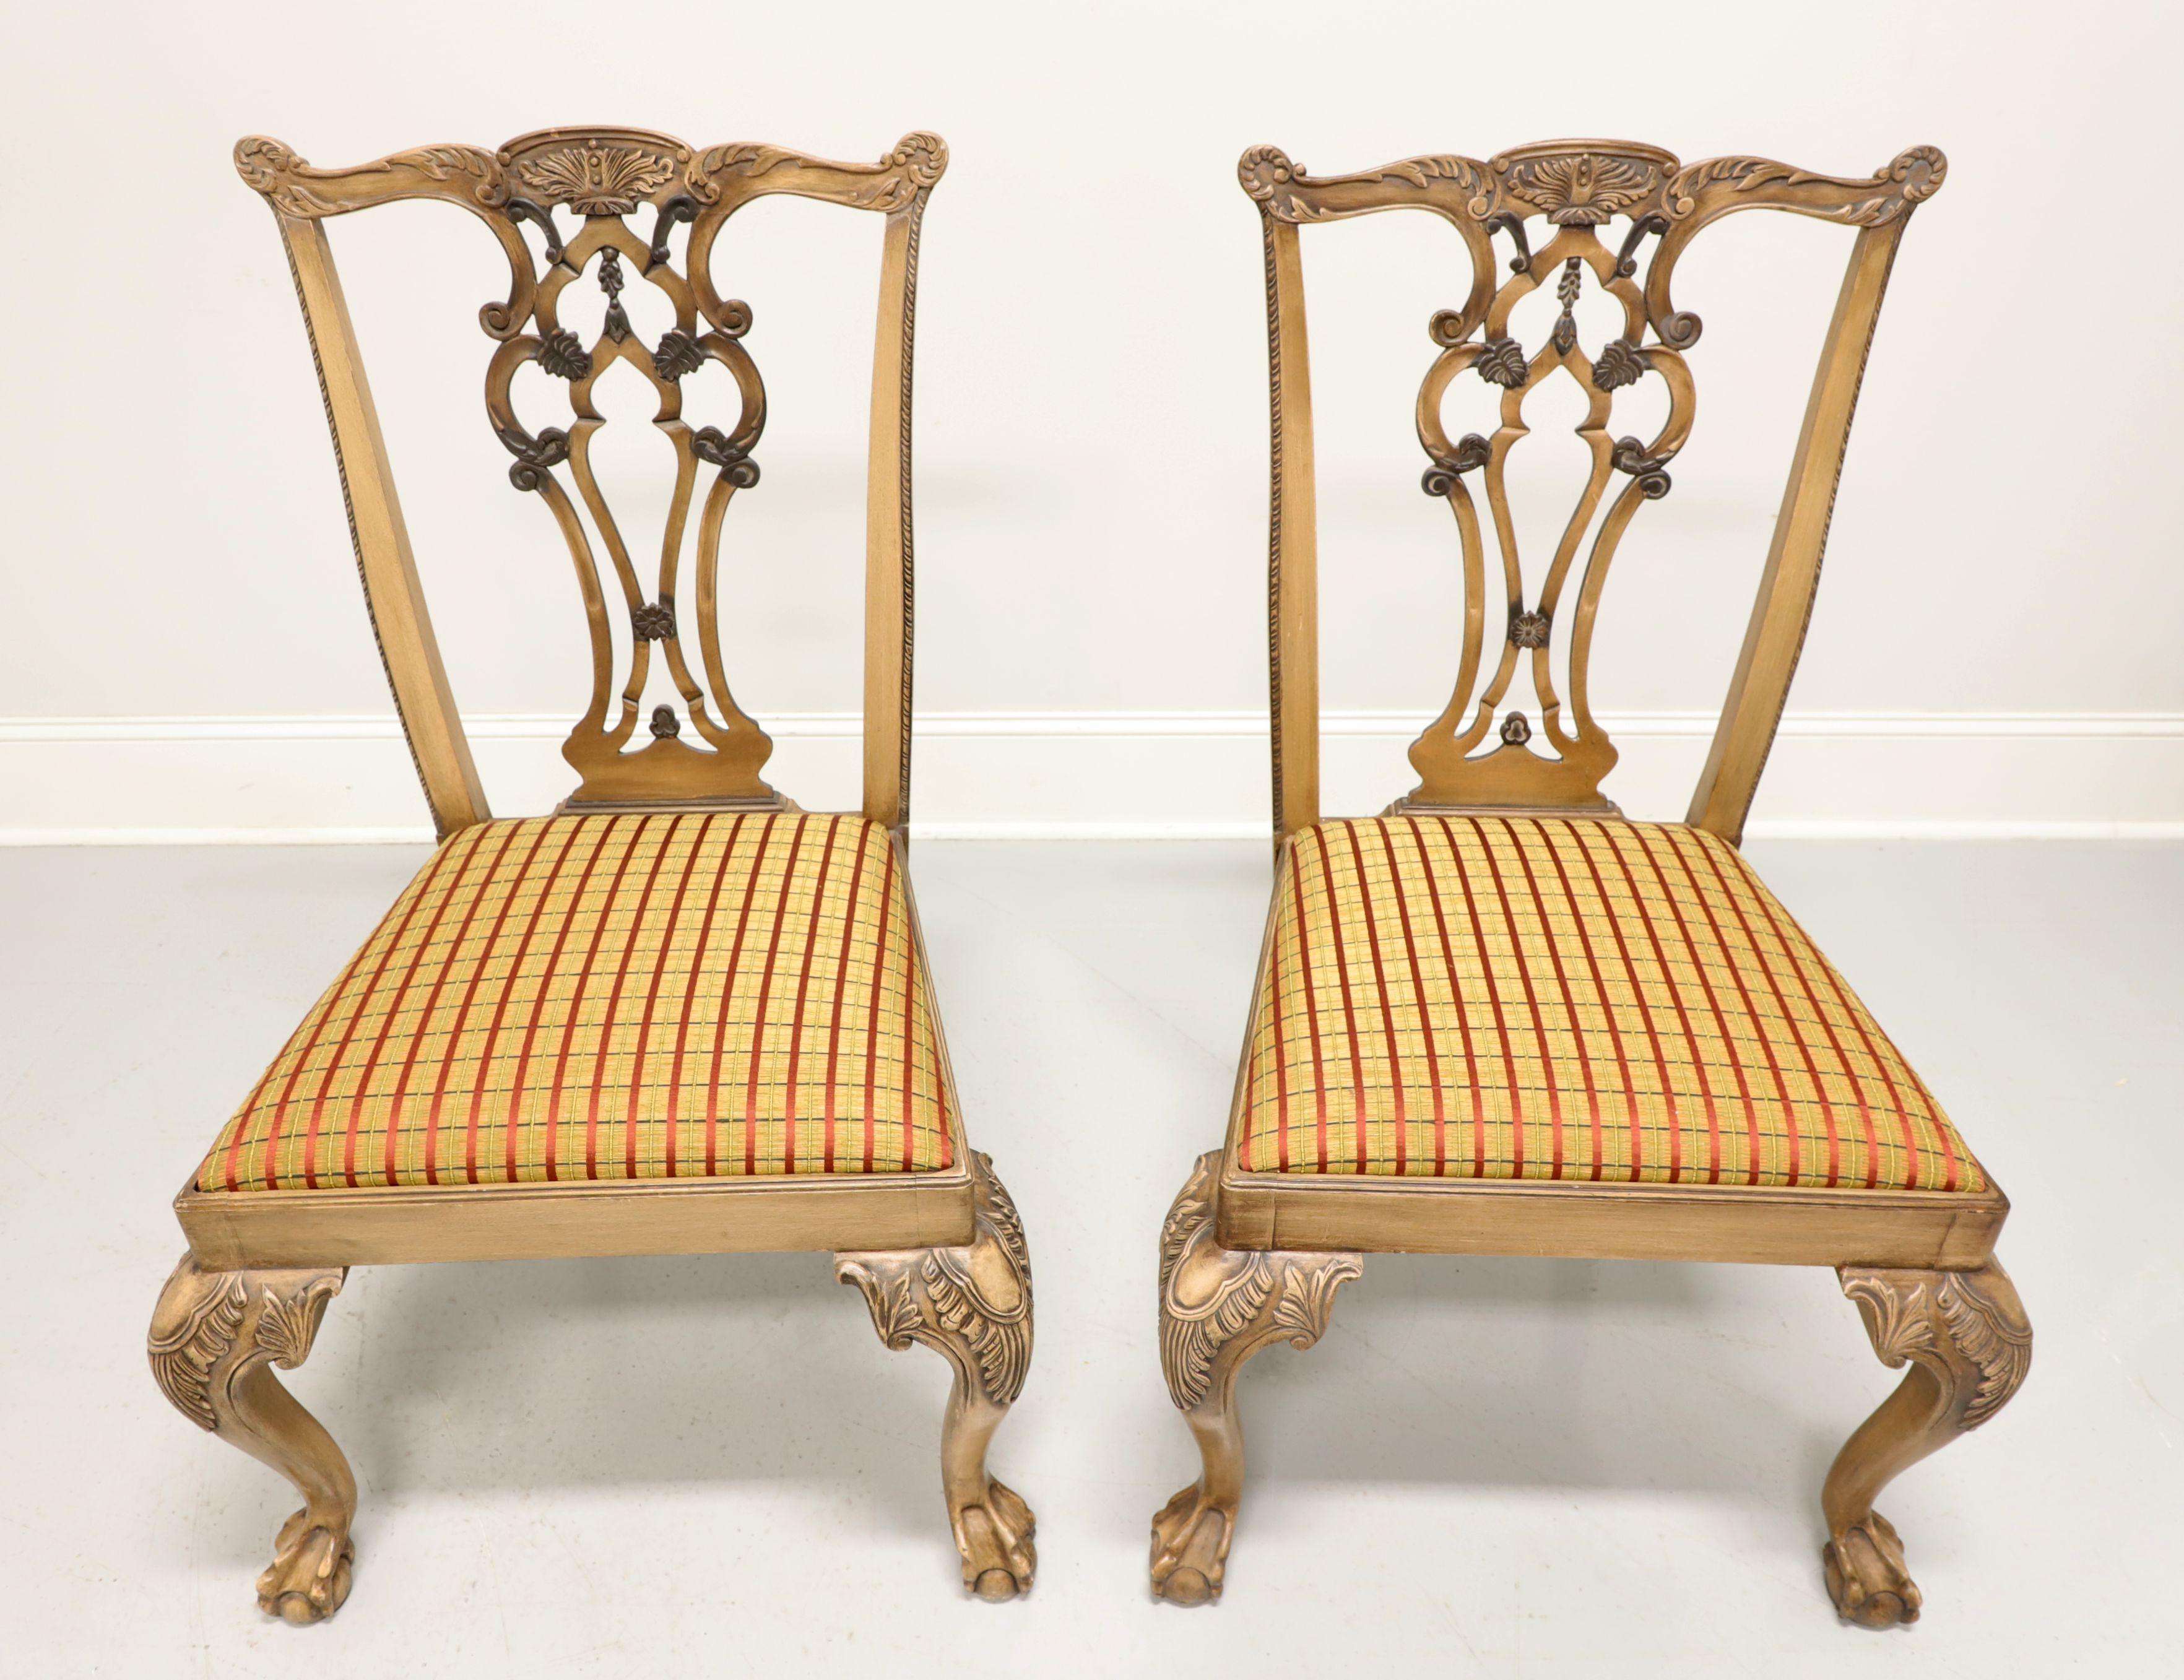 A pair of dining side chairs in the Chippendale style, unbranded, similar quality to Century or Hickory Chair. Solid hardwood with a slightly distressed light stain finish, carved crest rail, back splat, knees and cabriole legs with ball in claw